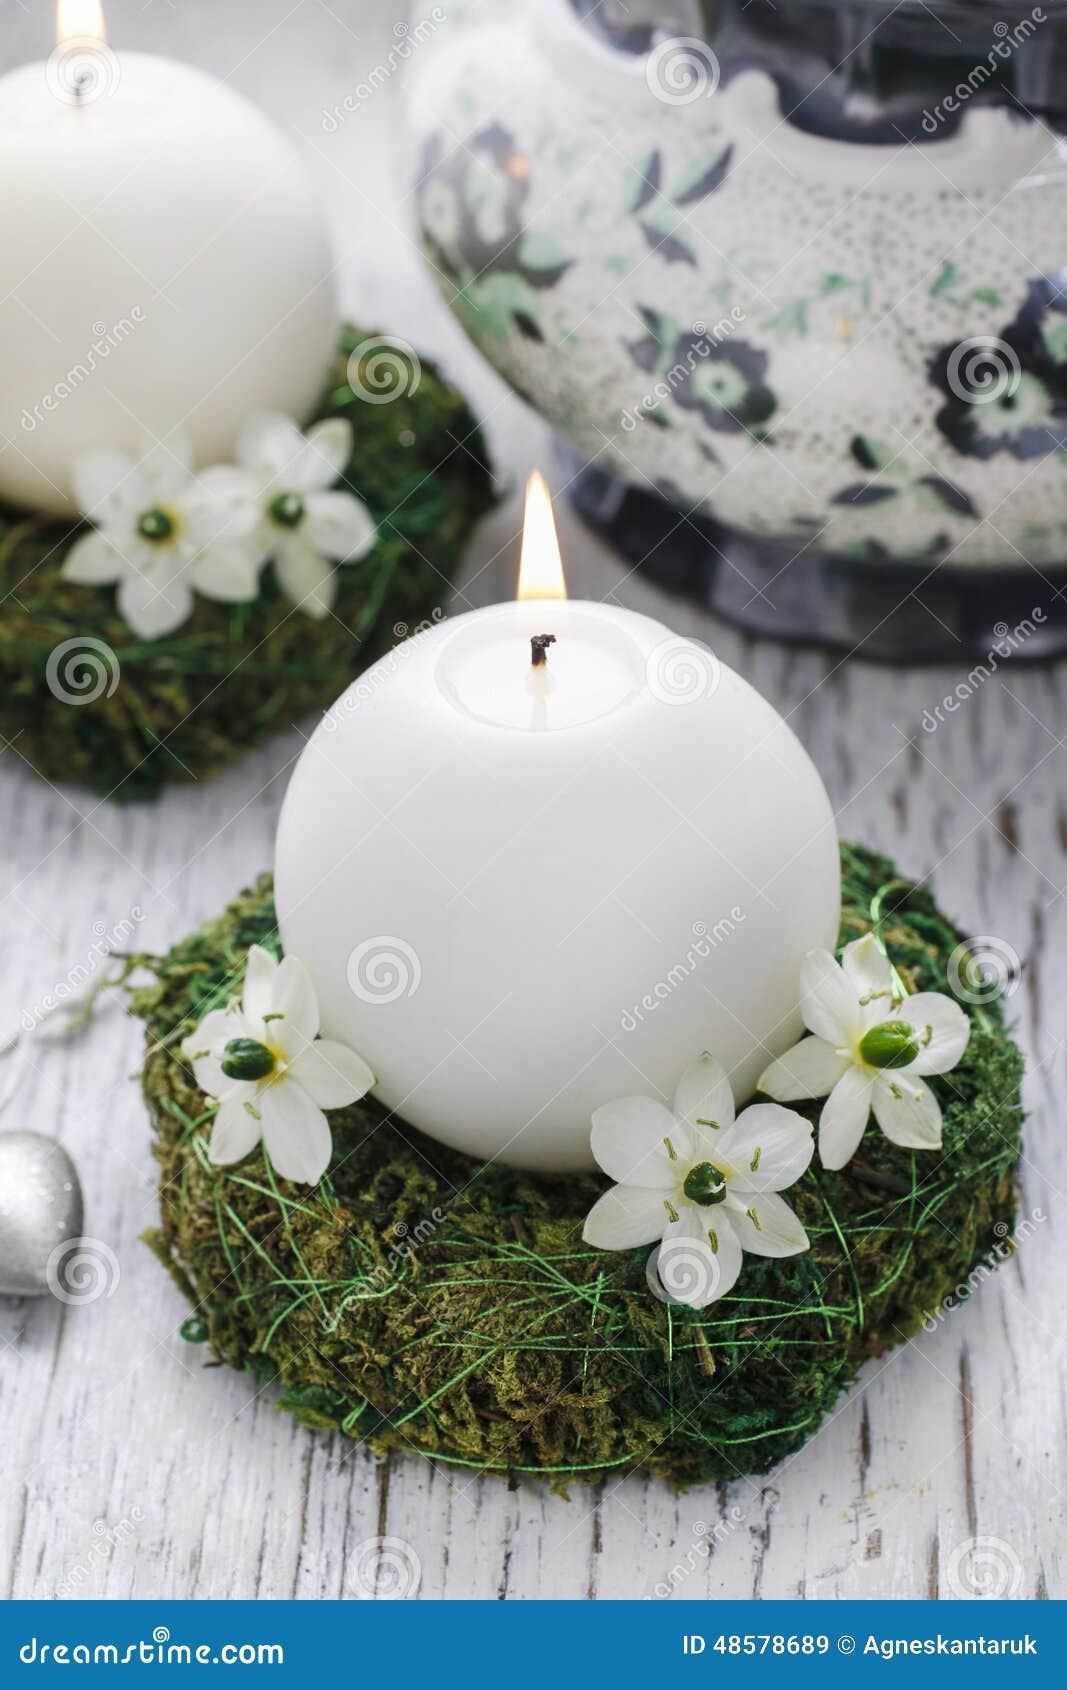 Fresh Spring Decorations For The First Communion Stock Image